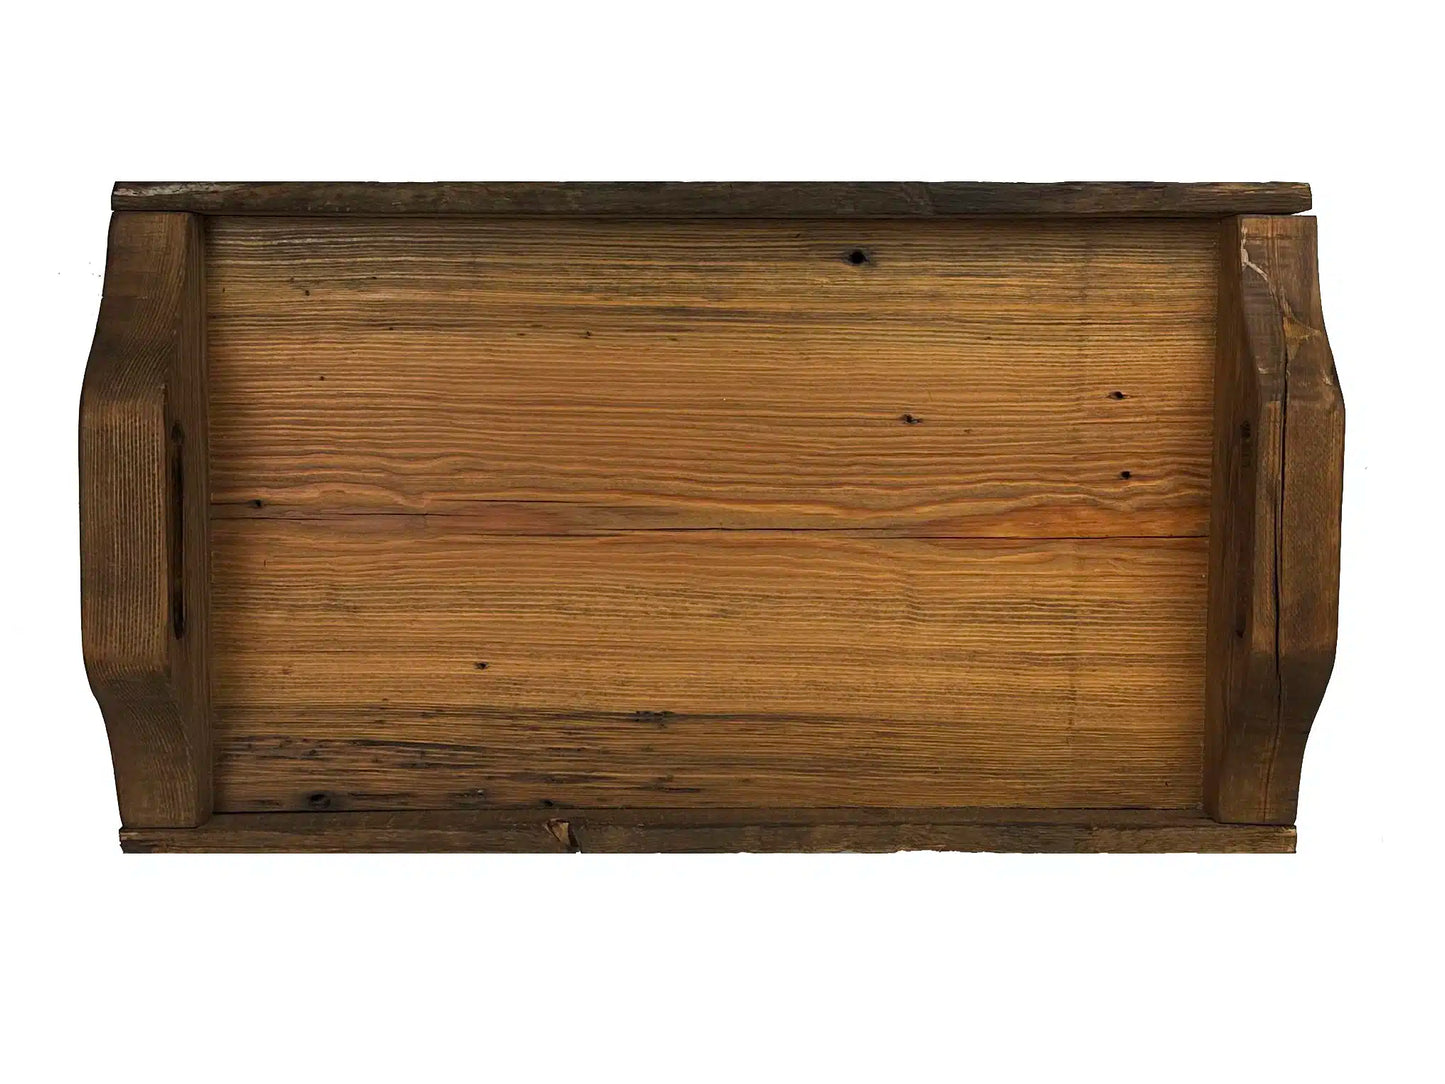 serving tray in a top down view. Displayed are the woods grain pattern, nail holes, and a characteristic called checking with looks like small cracks.